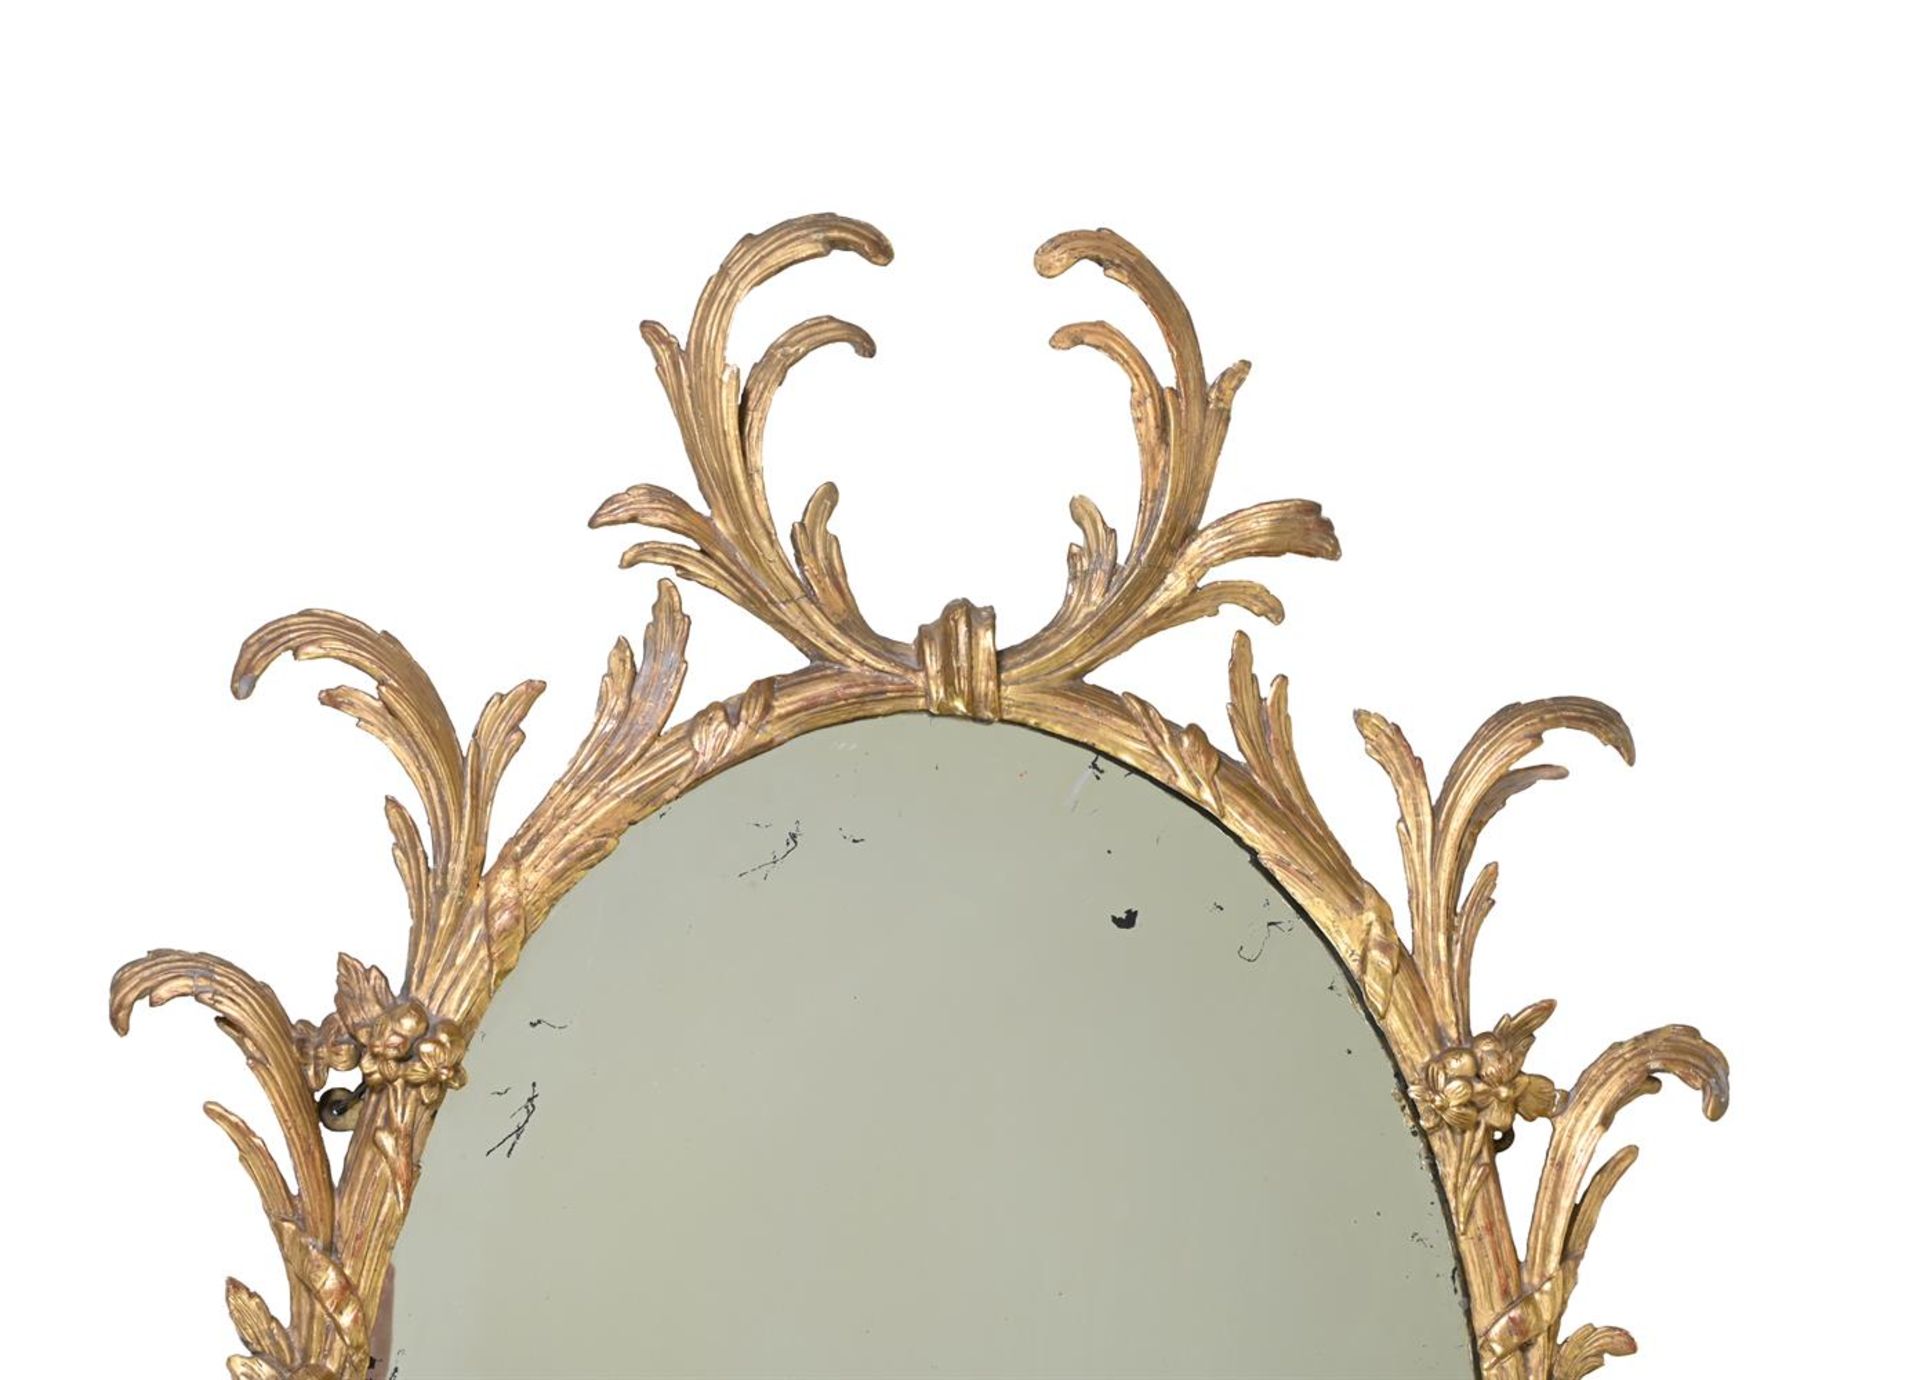 A GEORGE III CARVED GILTWOOD MIRROR, CIRCA 1760 - Image 2 of 3